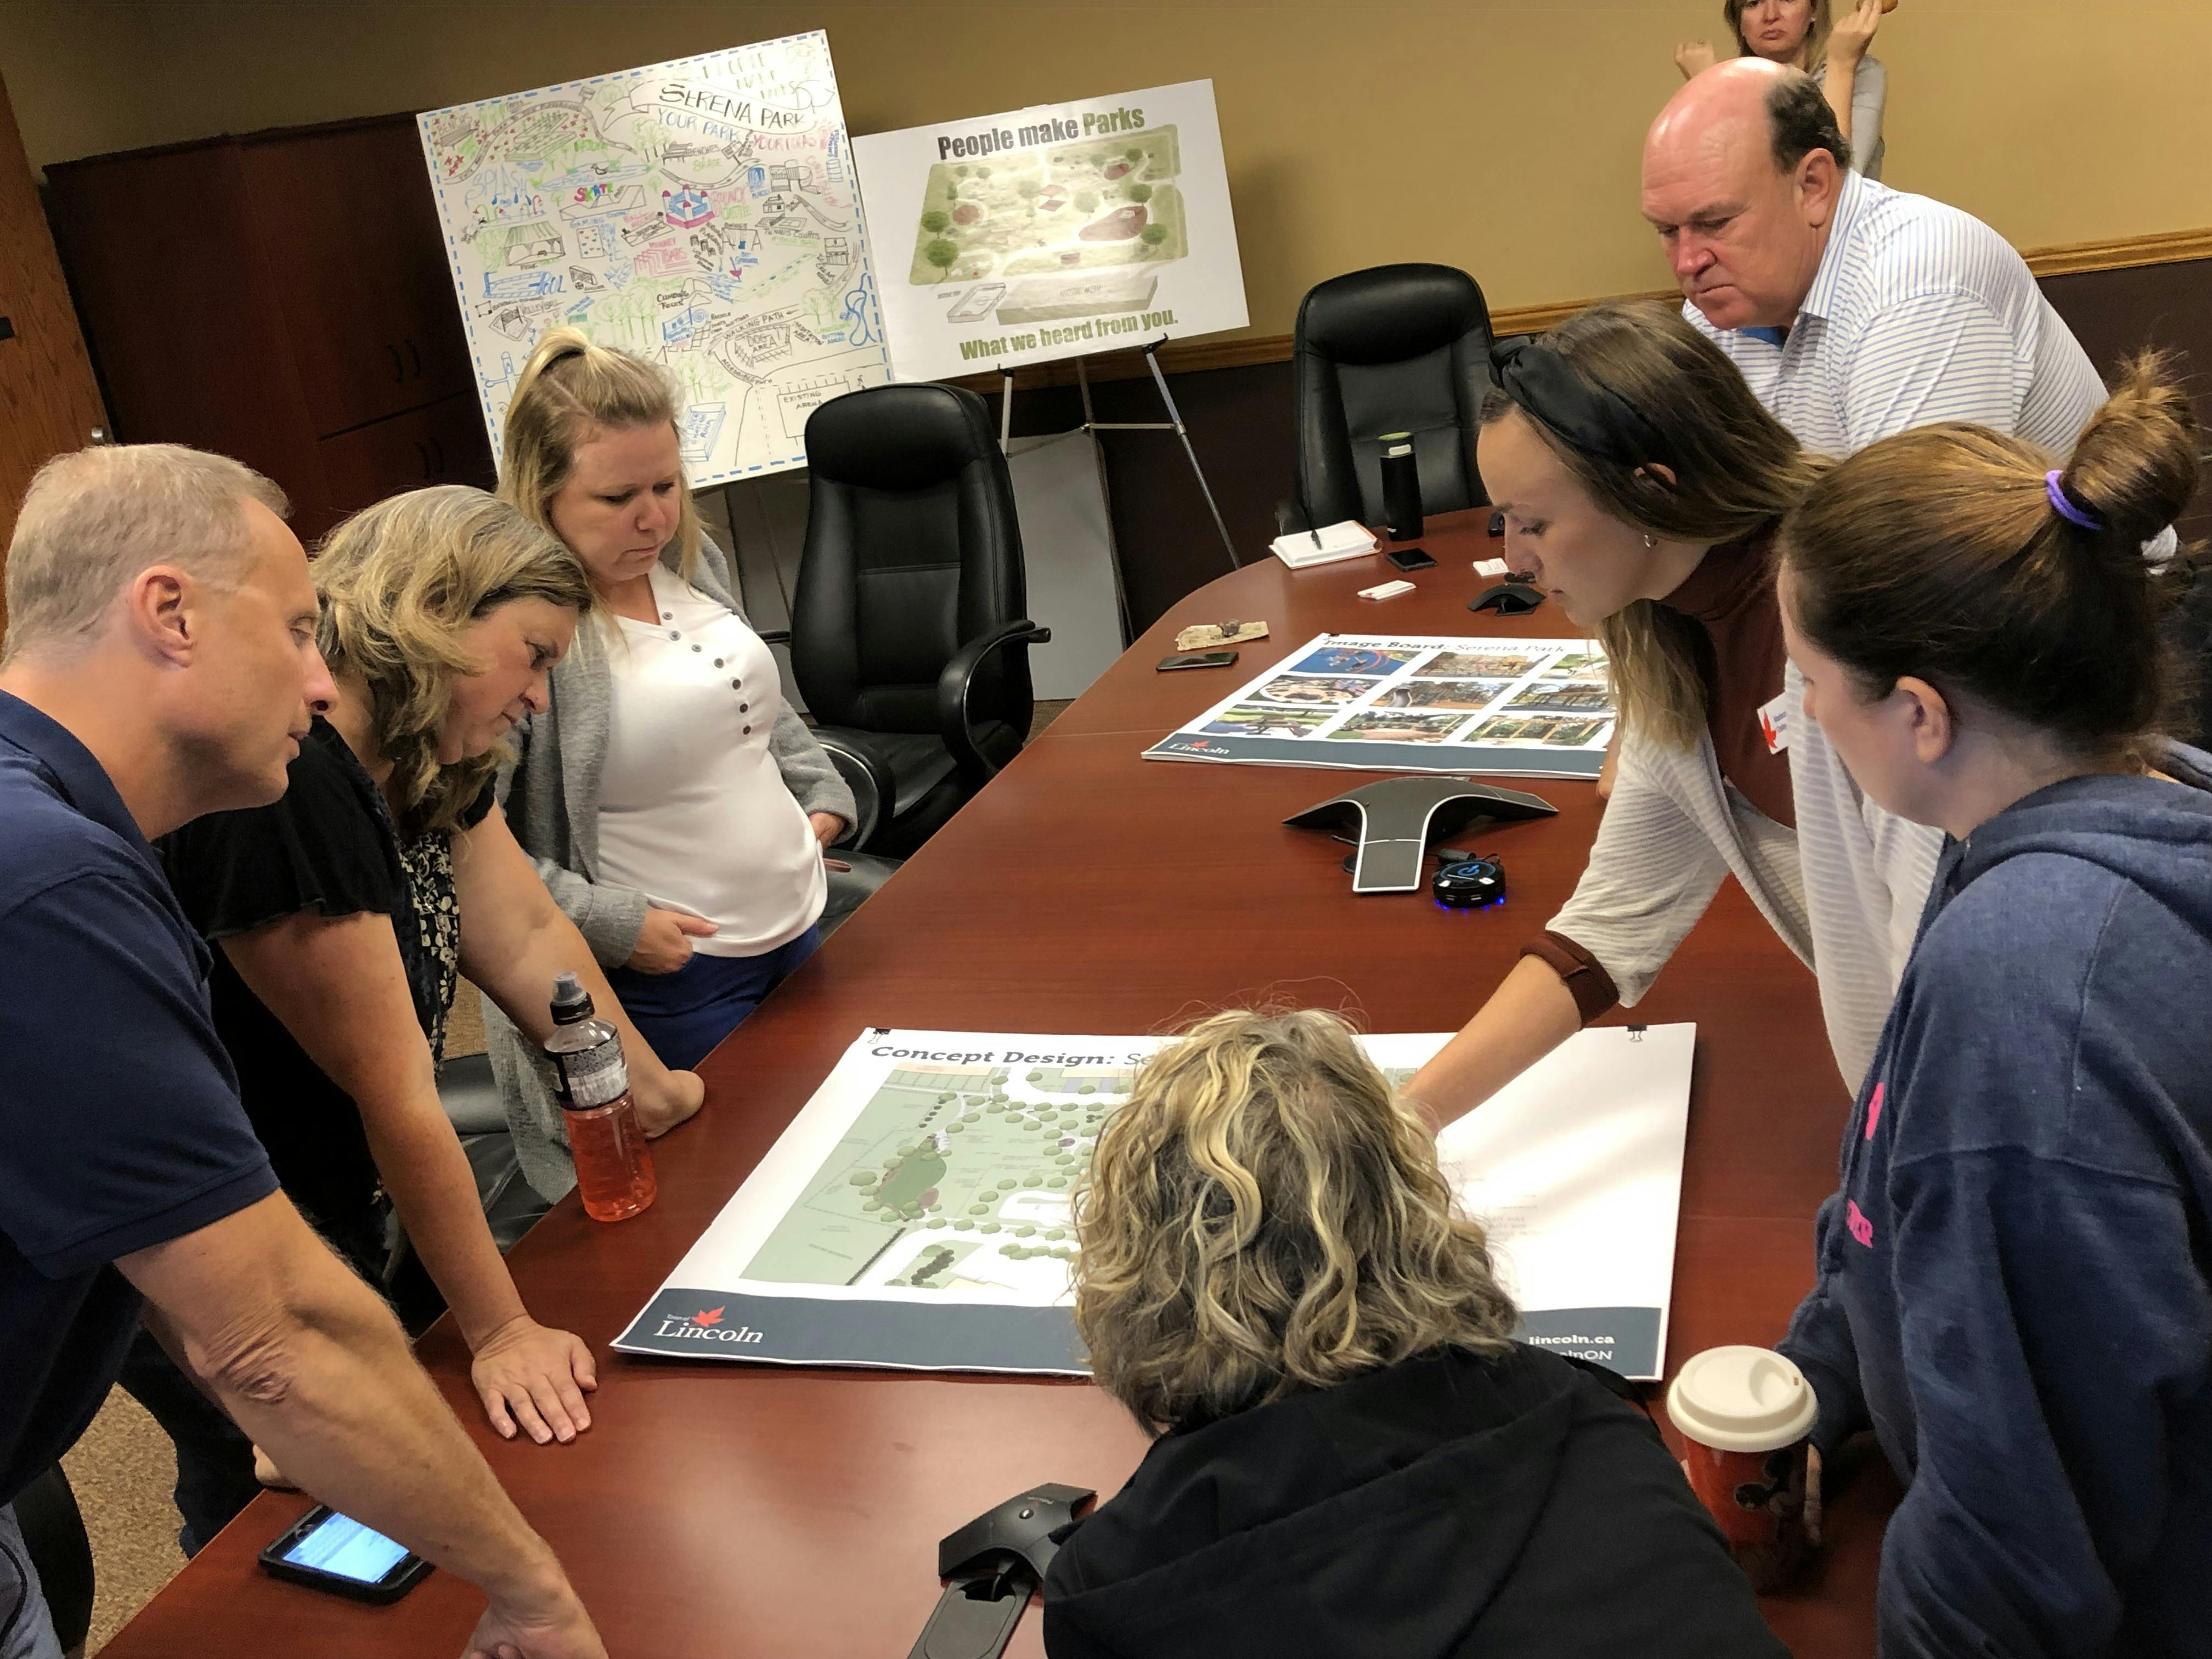 Lincoln residents participate in a focus group to provide feedback on the park design